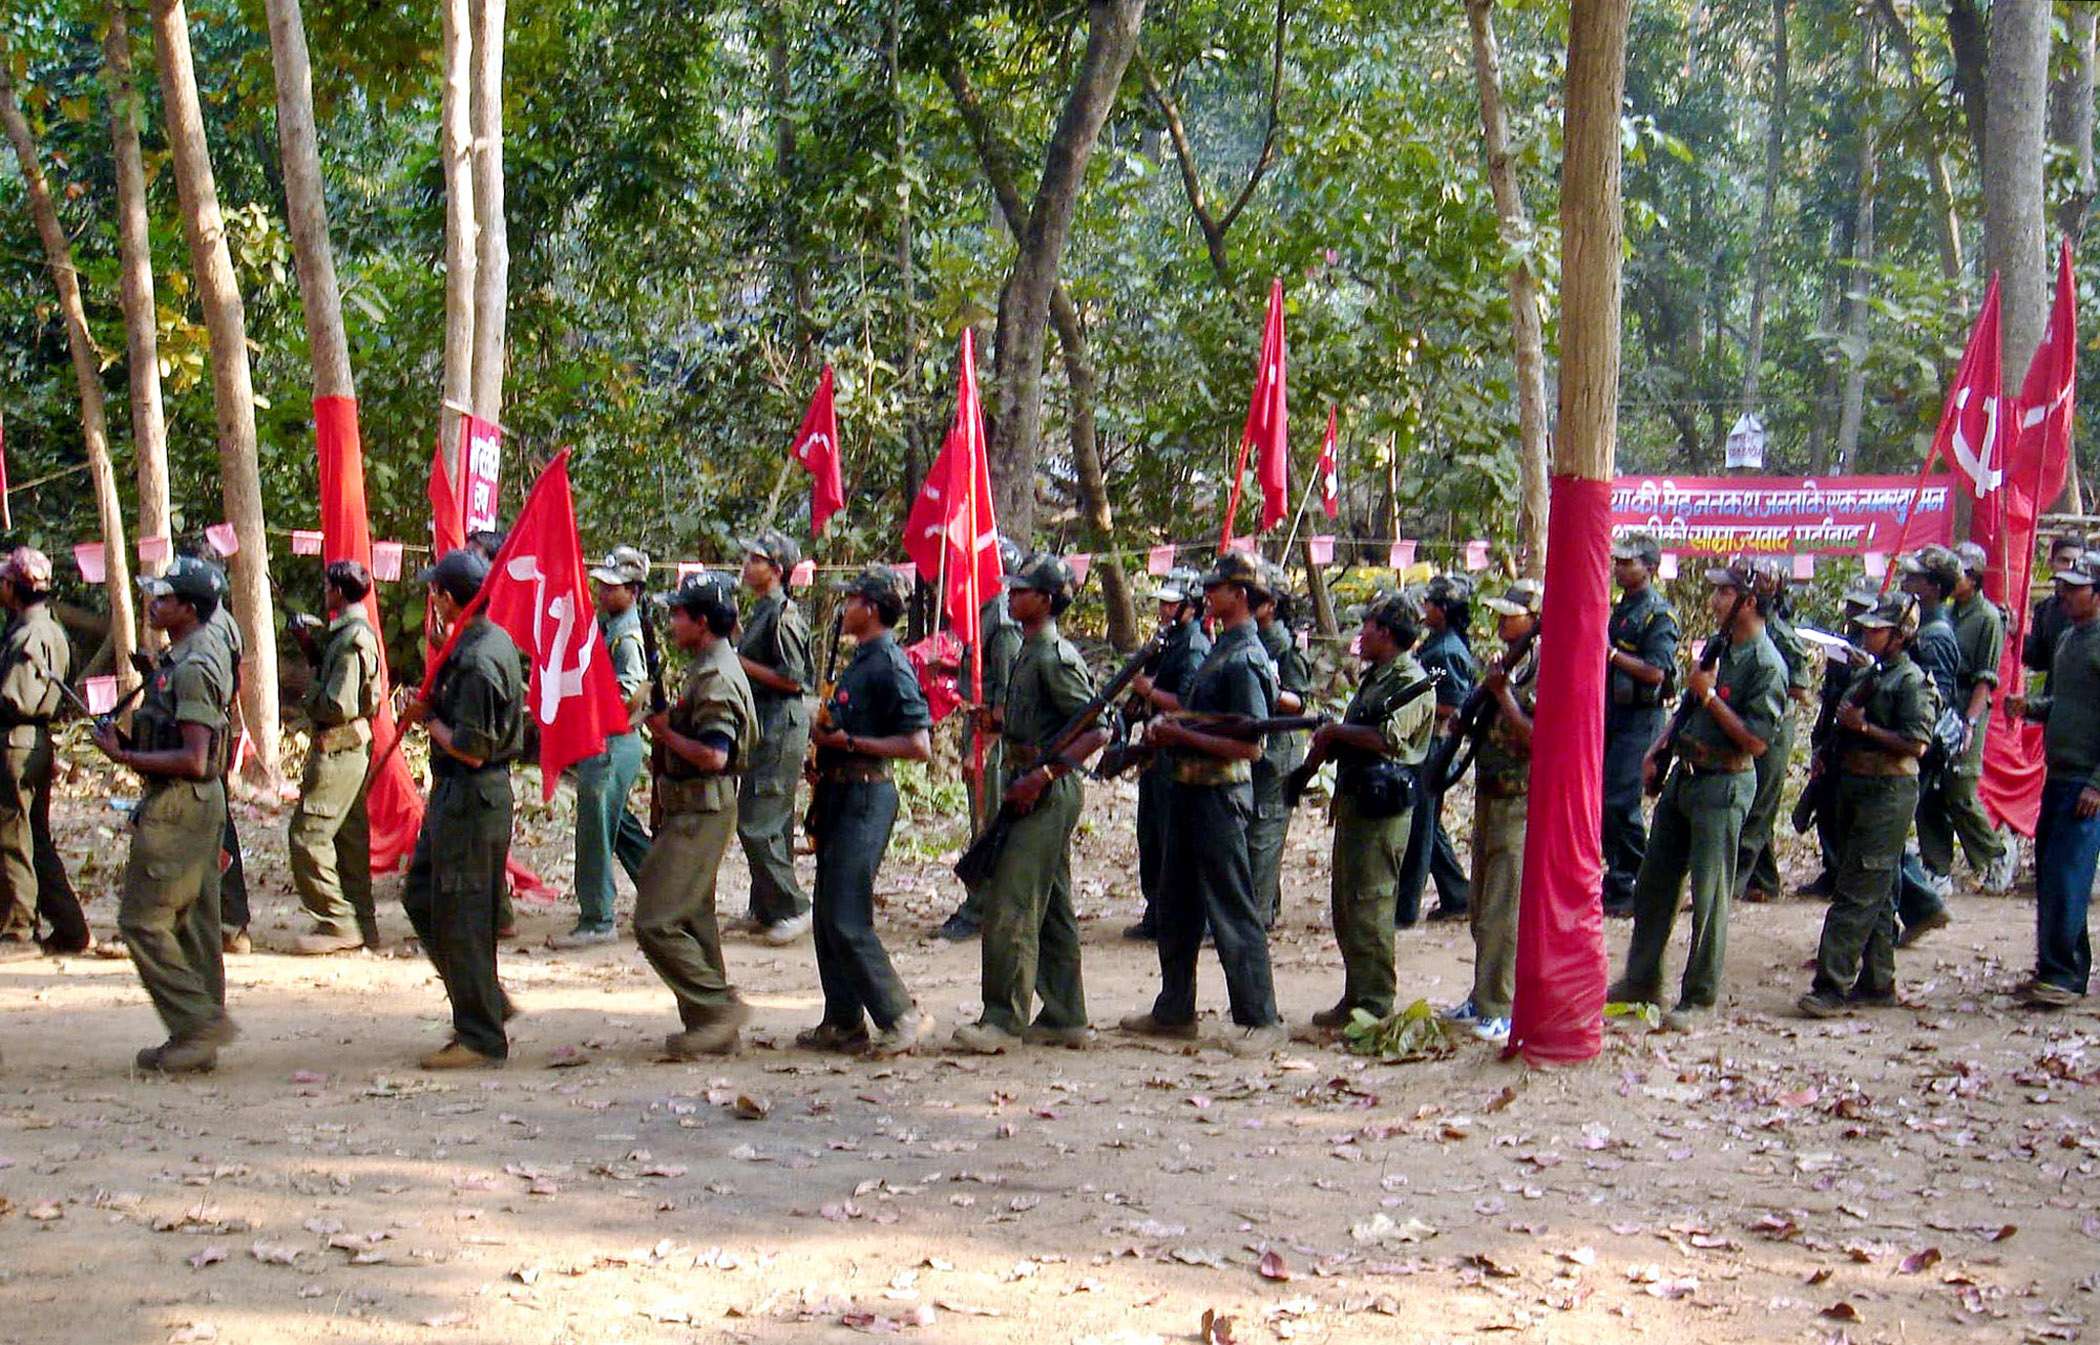 Maoist rebels march in the jungles of the Indian state of Chhatisgarh, 1,500km southeast of New Delhi. The rebels, who claim to be inspired by Chinese revolutionary Mao Zedong, have been fighting in several Indian states, demanding land and jobs for agricultural labourers and the poor. Photo: AP